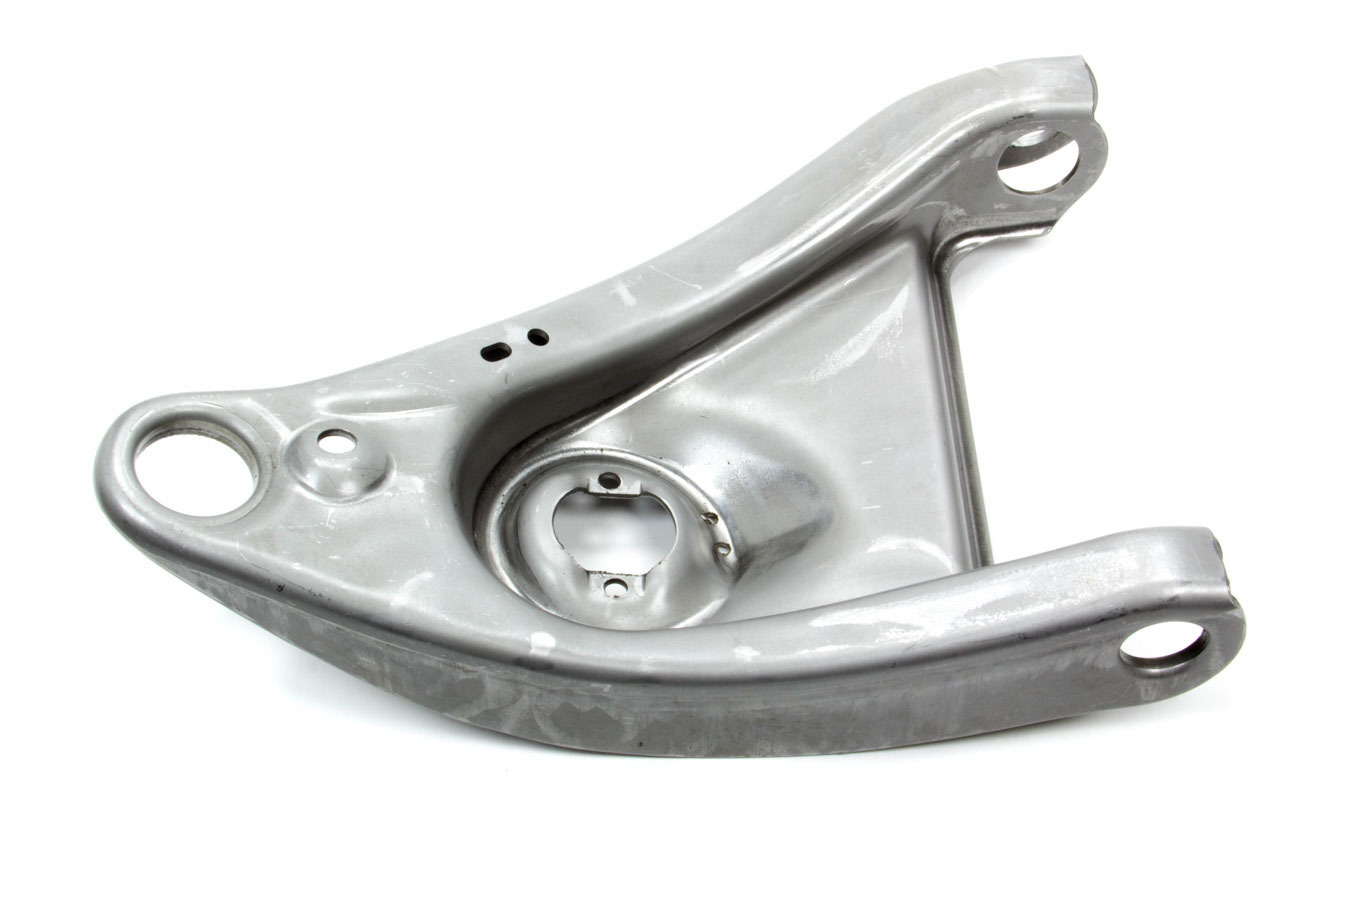 Hepfner Racing Products 4263 Control Arm, OEM Nova Style, Passenger Side, Lower, Weld-On Ball Joints, Steel, Natural, GM G-Body 1978-88, Each